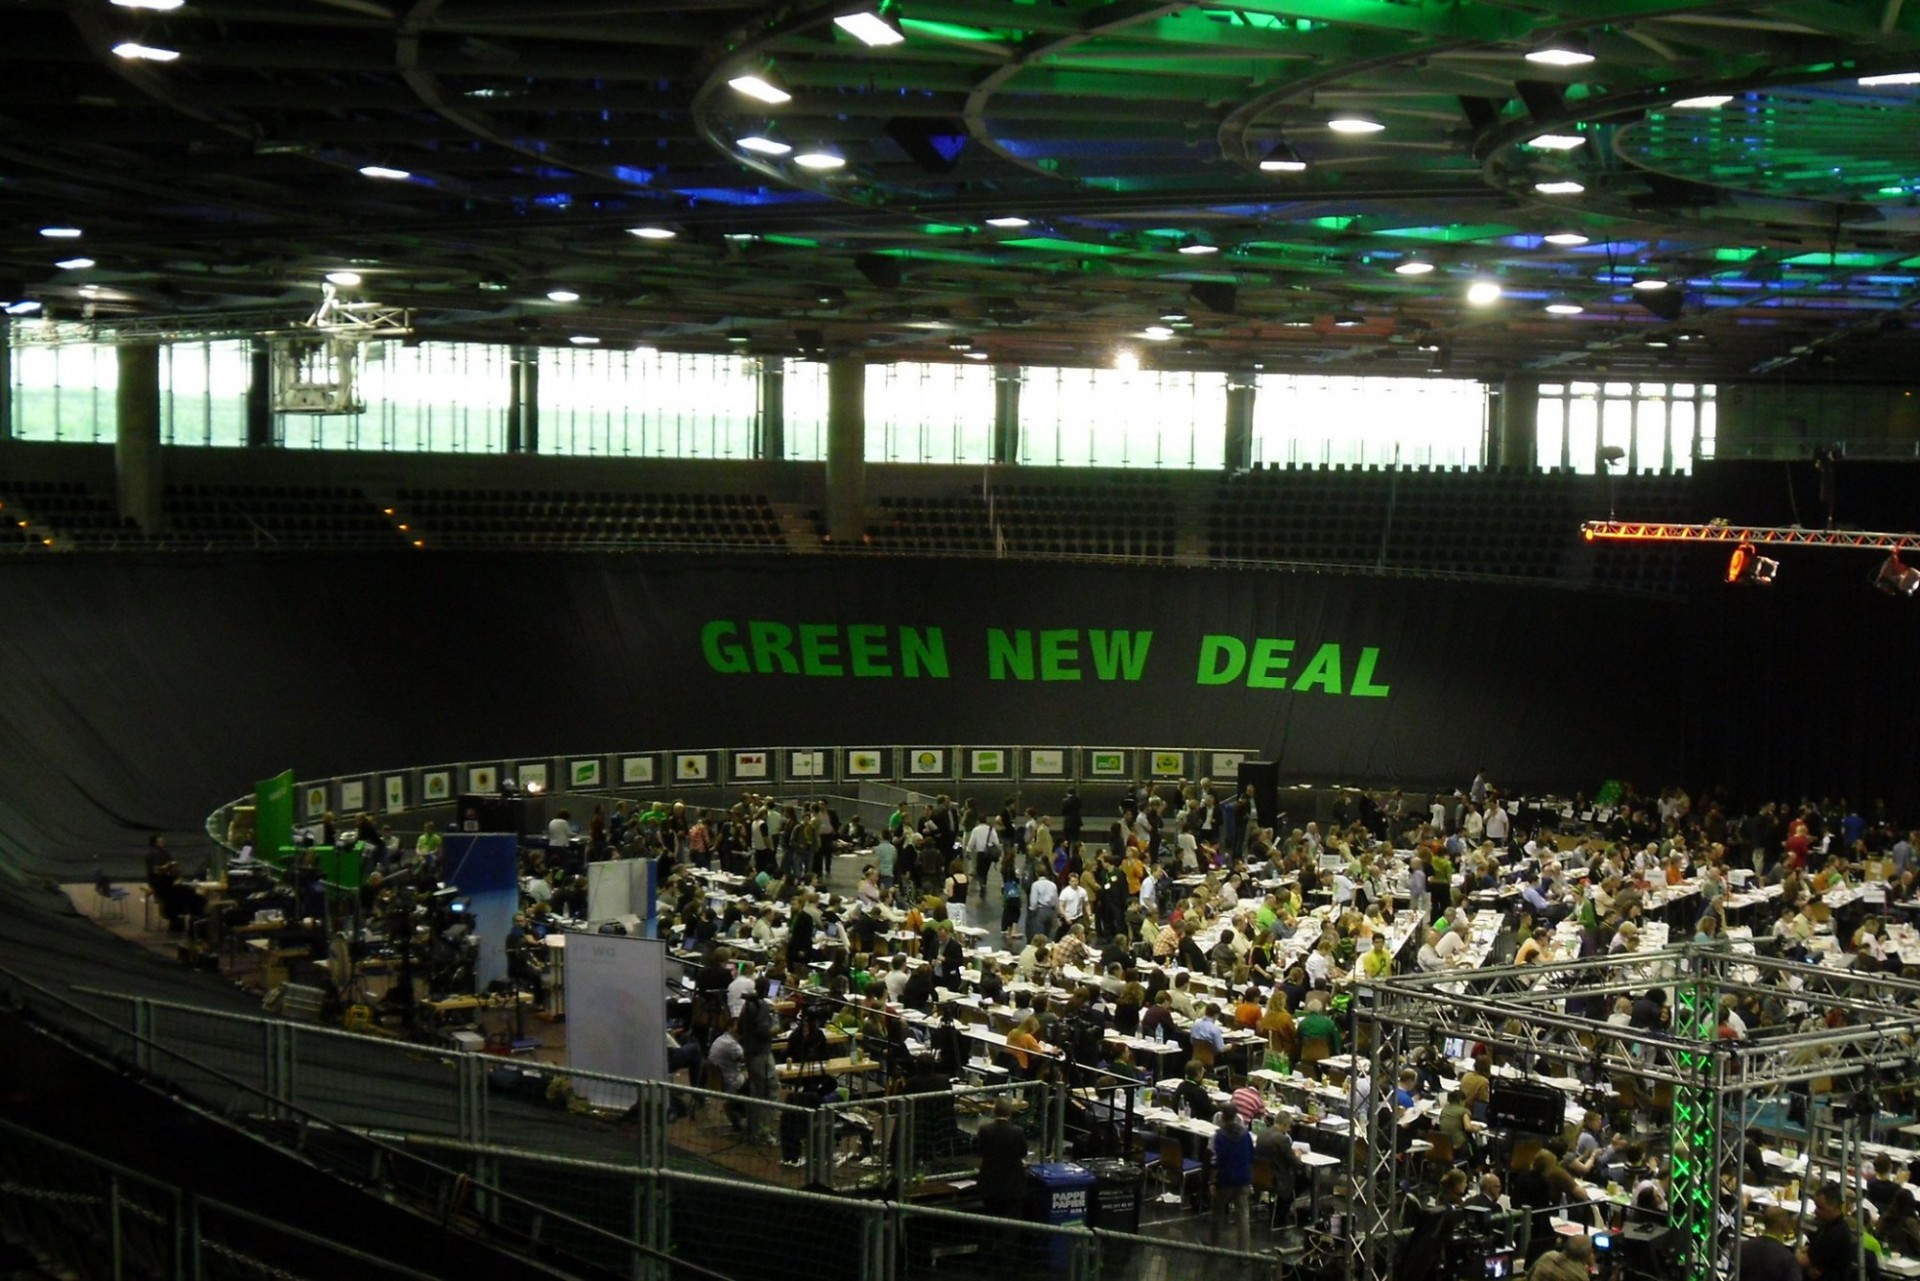 A conference center with people gathering in the foreground and a Green New Deal sign in the background.  